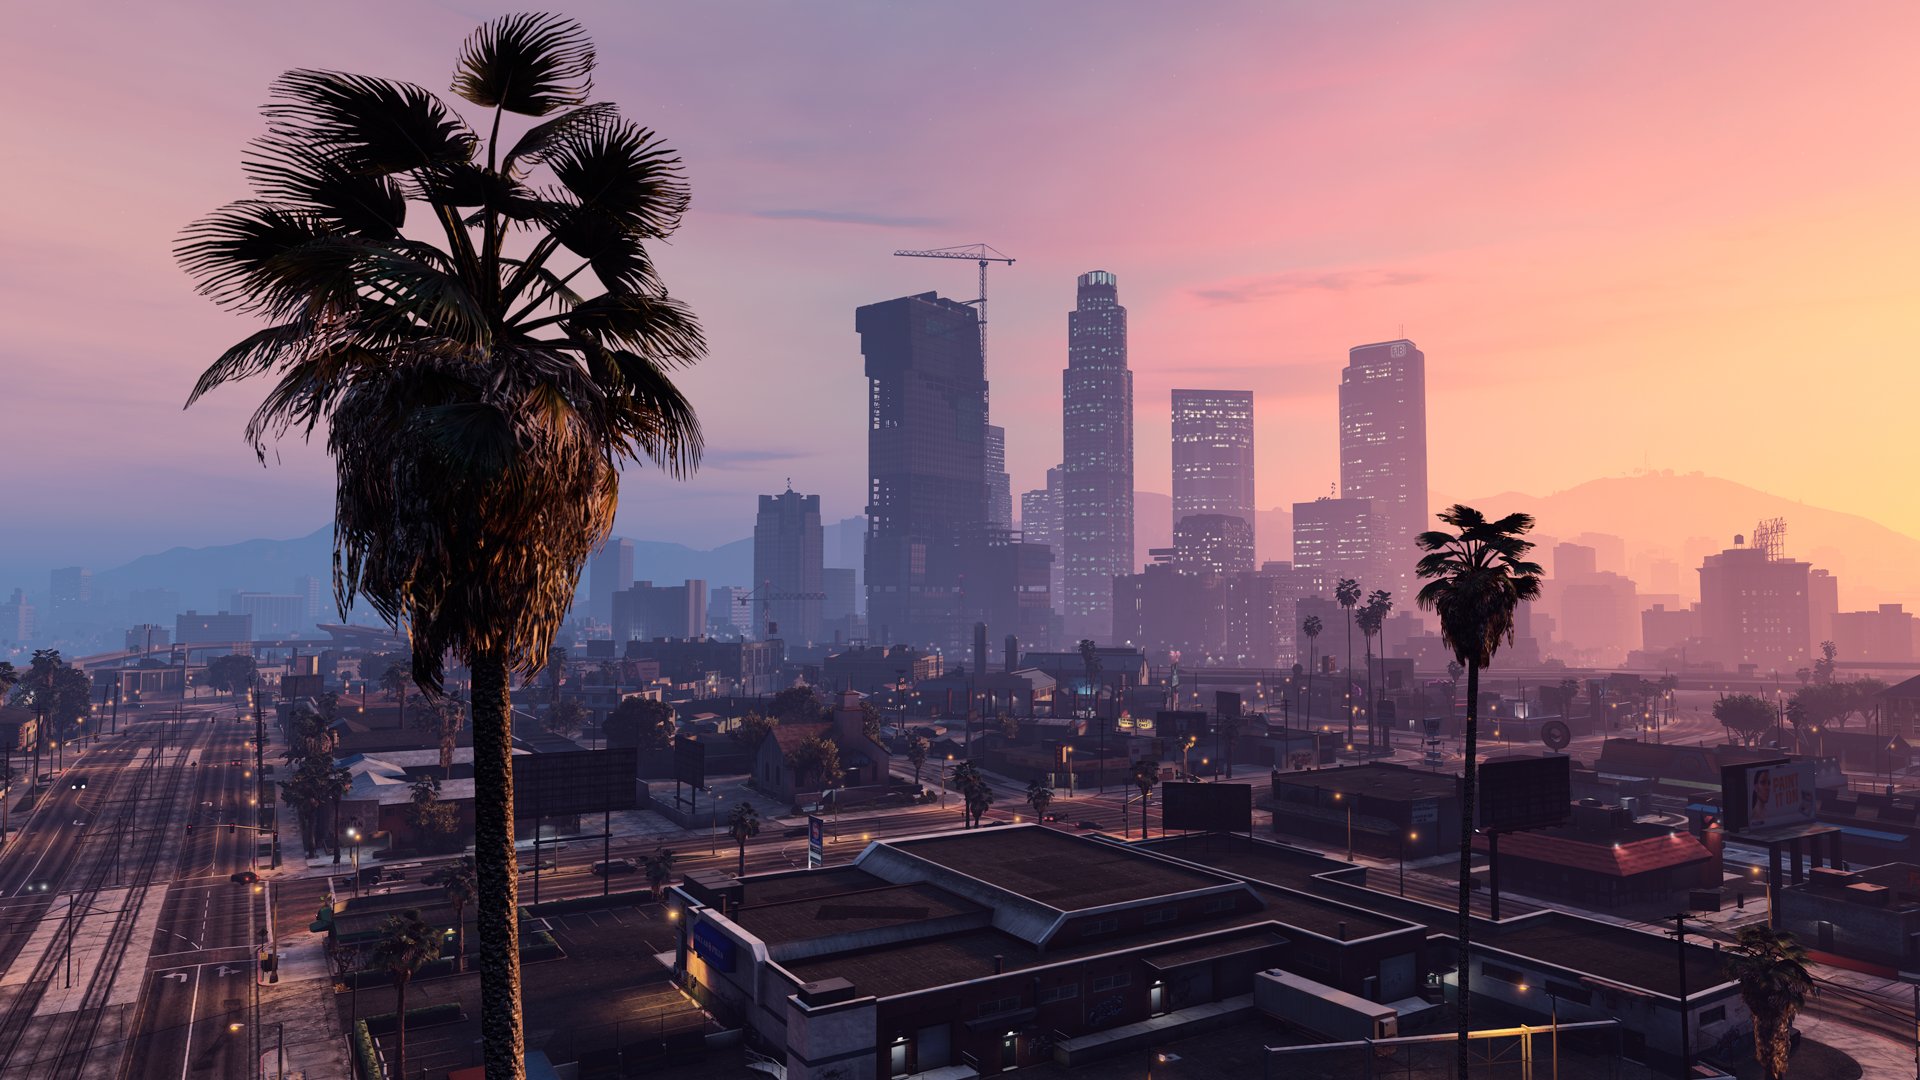 Rockstar Games confirms “active development for the next entry in the GTA series”